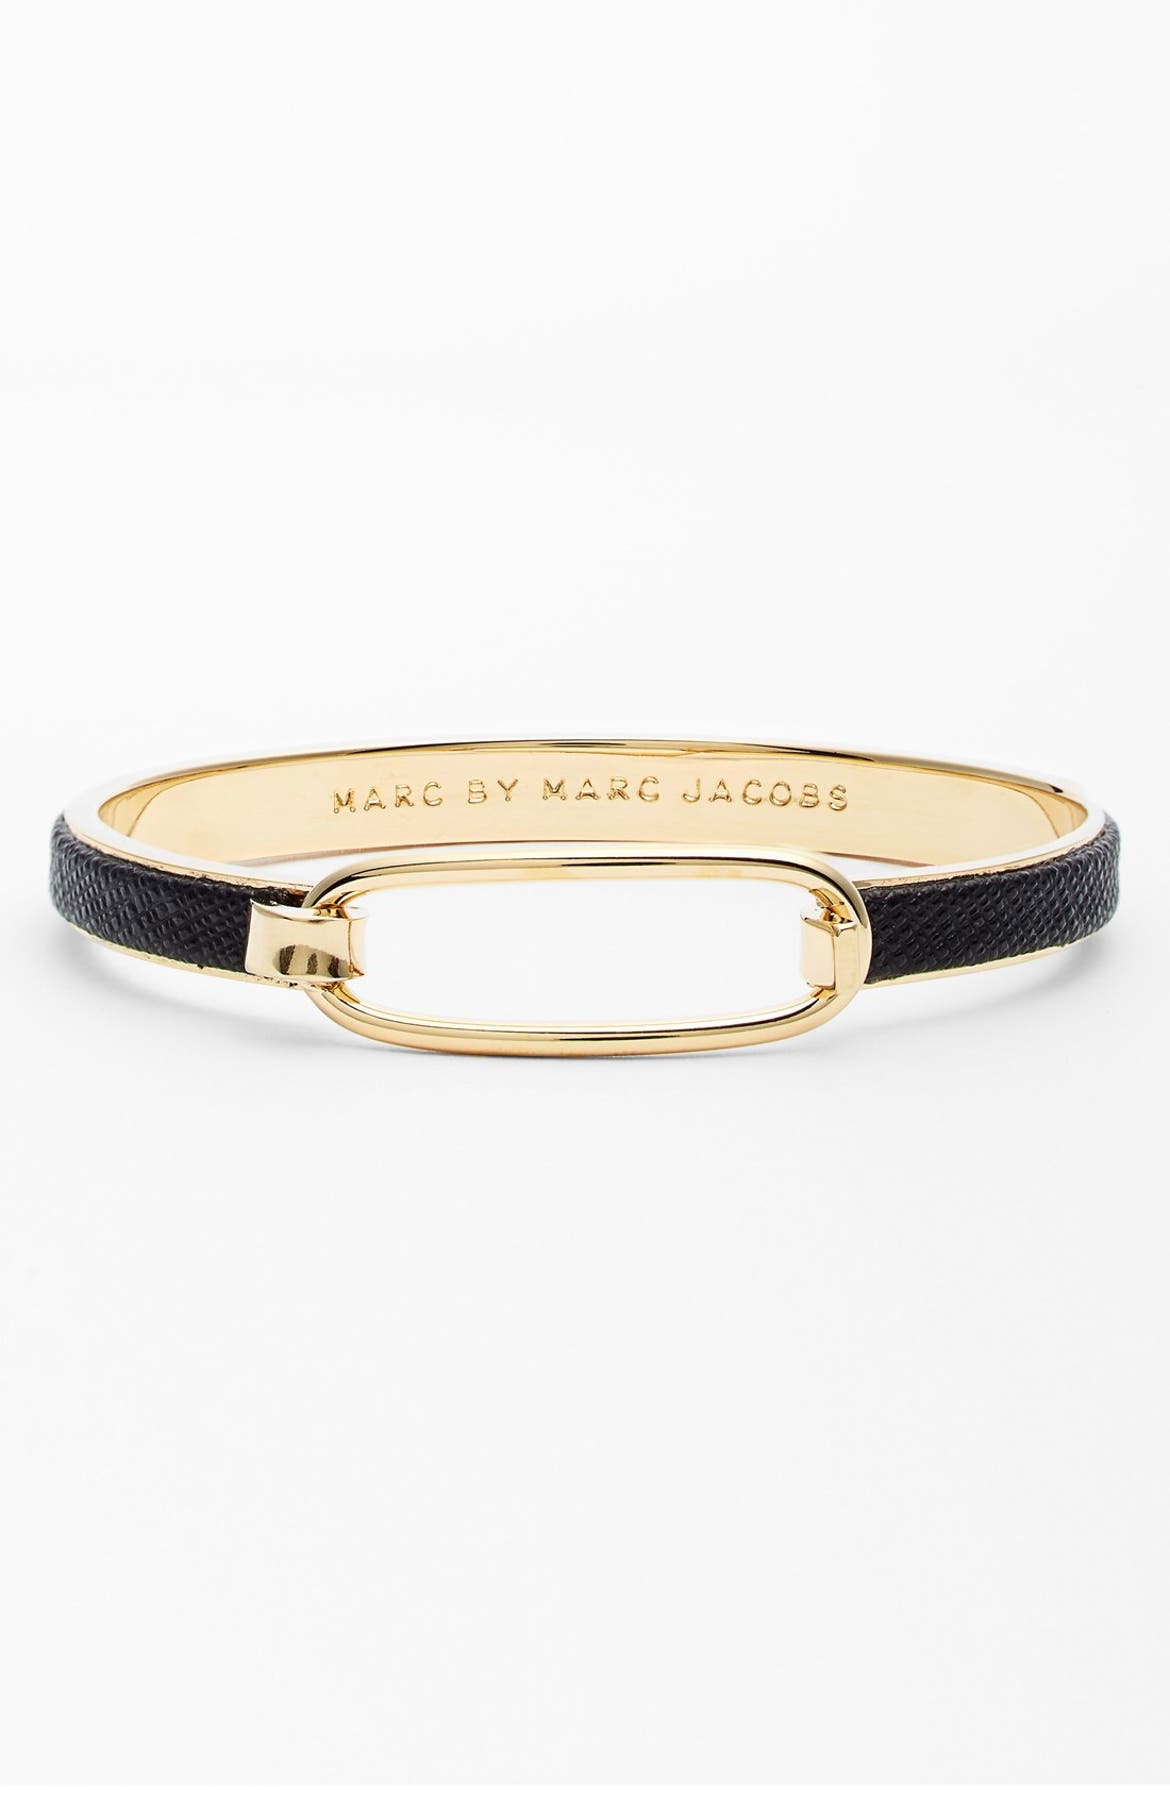 MARC BY MARC JACOBS 'Ferus' Leather Inlay Hinged Bangle | Nordstrom